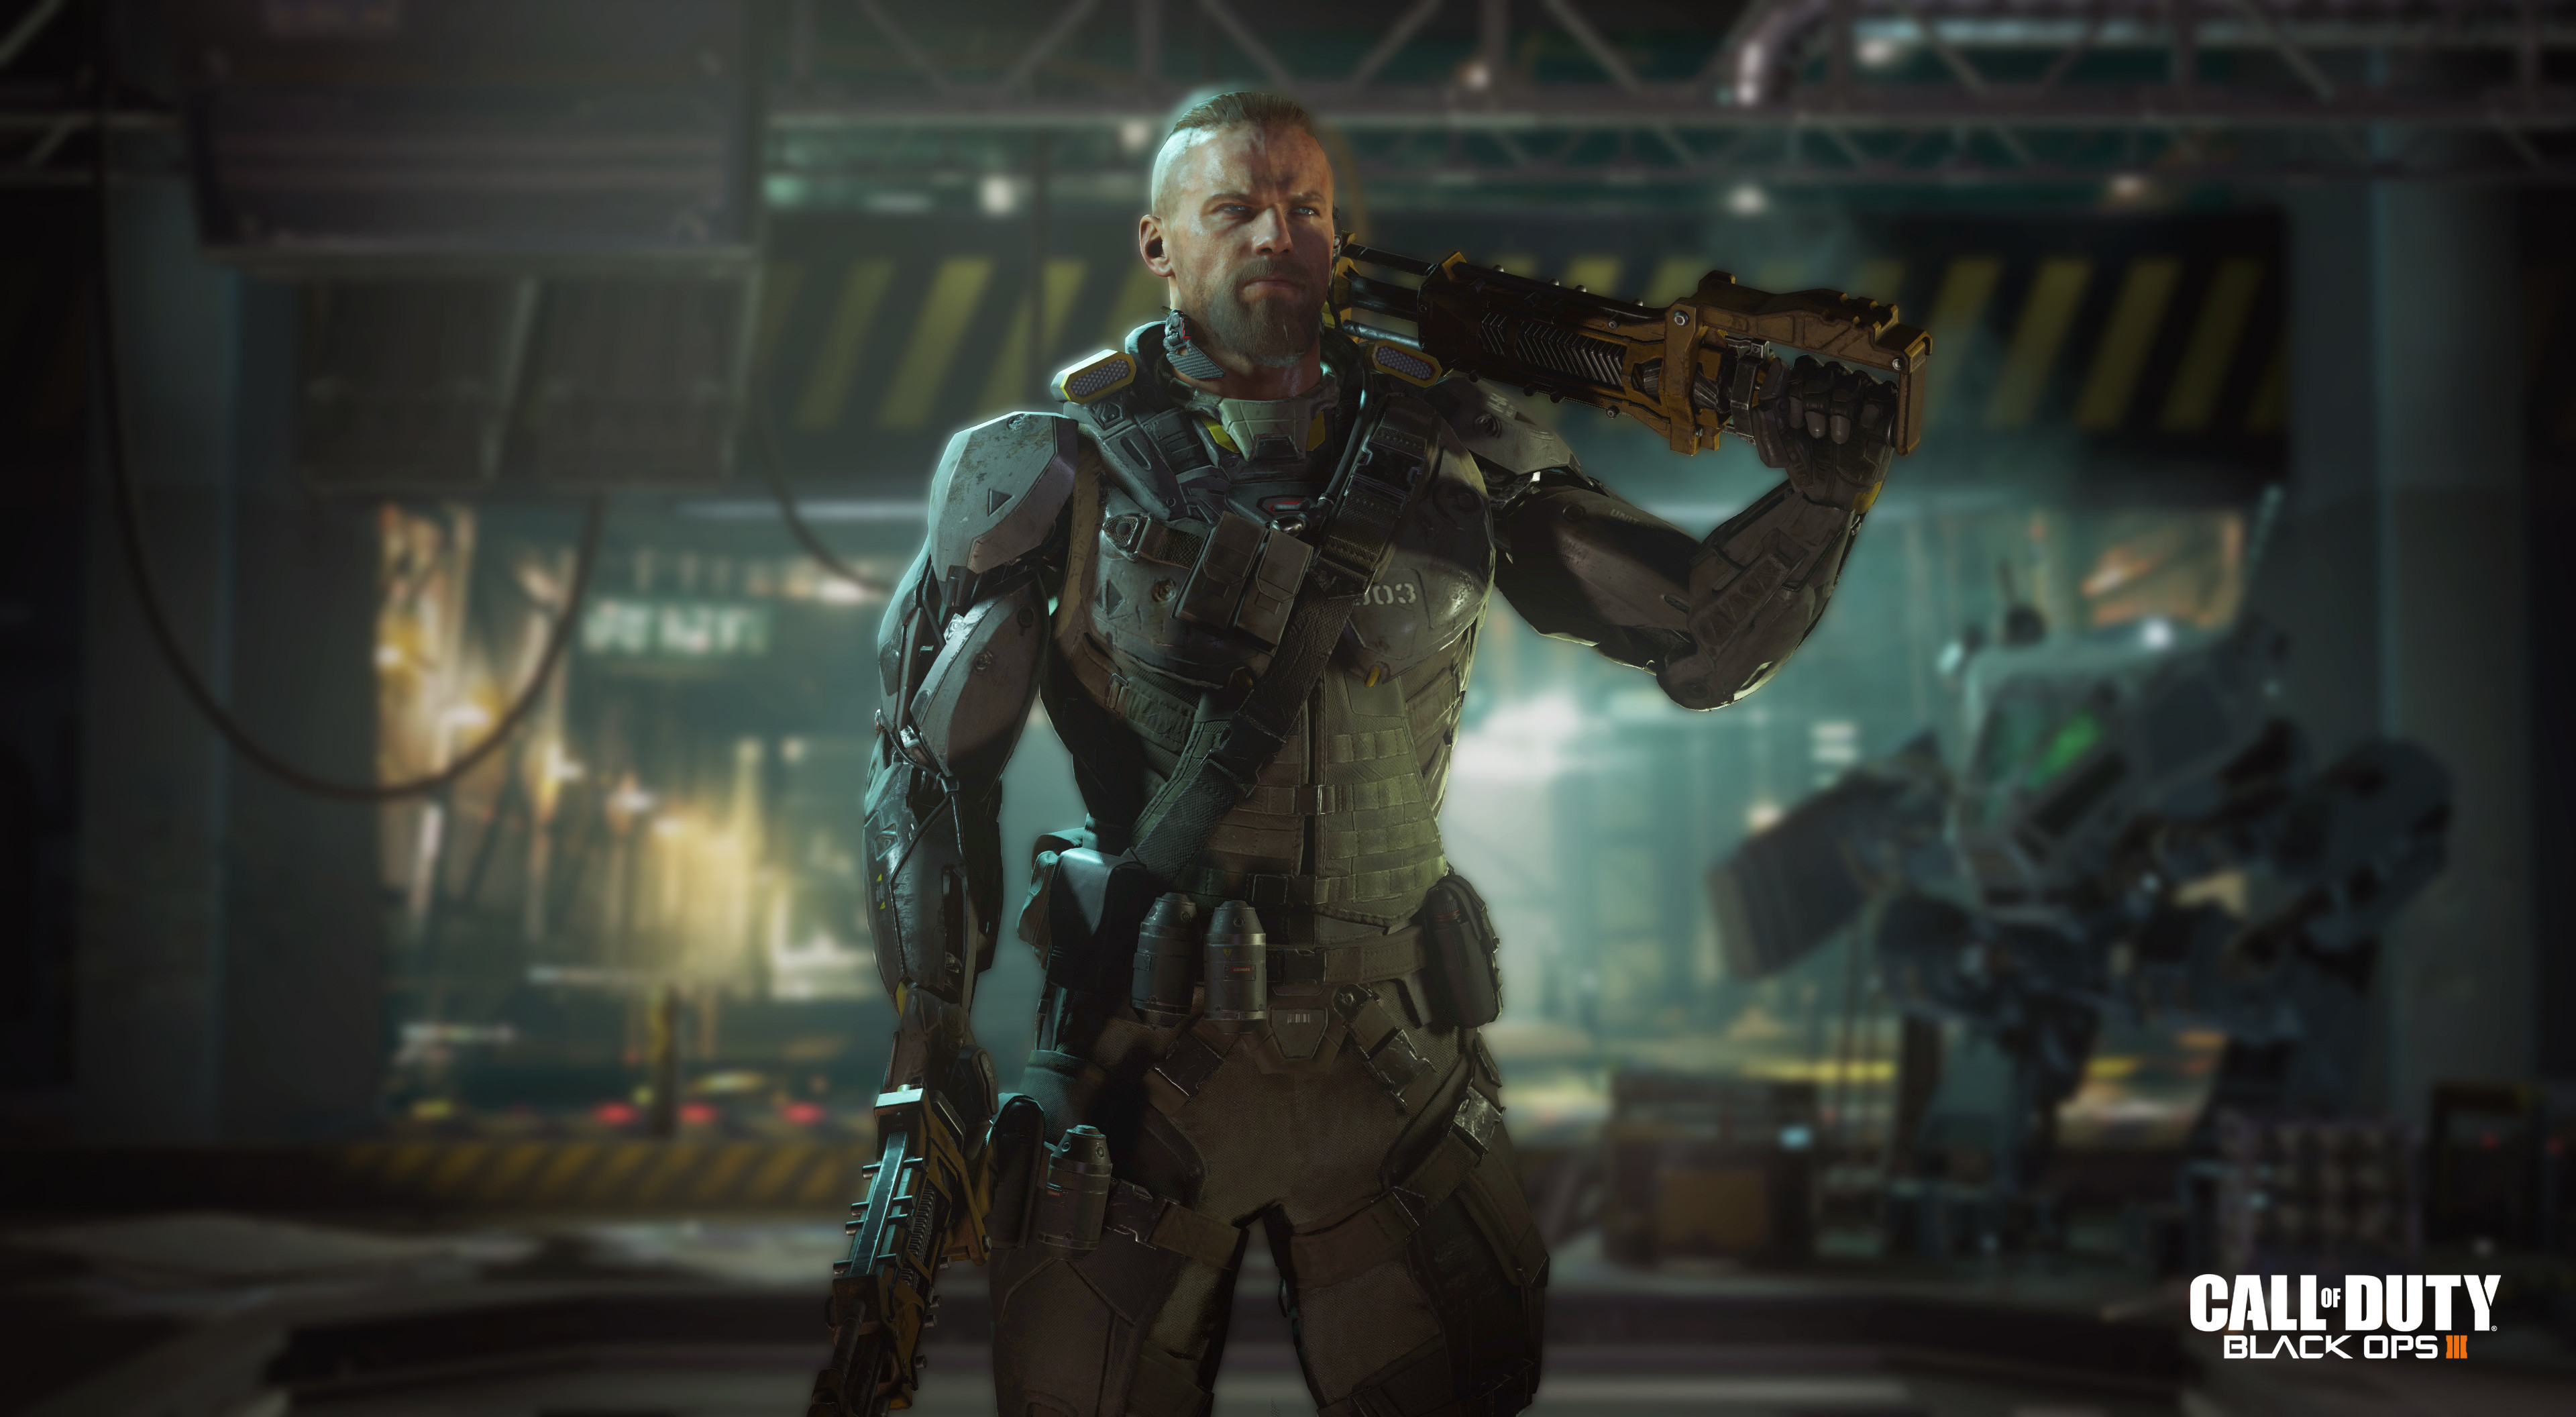 3840x2112 Call of Duty: Black Ops 3 Wallpapers and Backgrounds